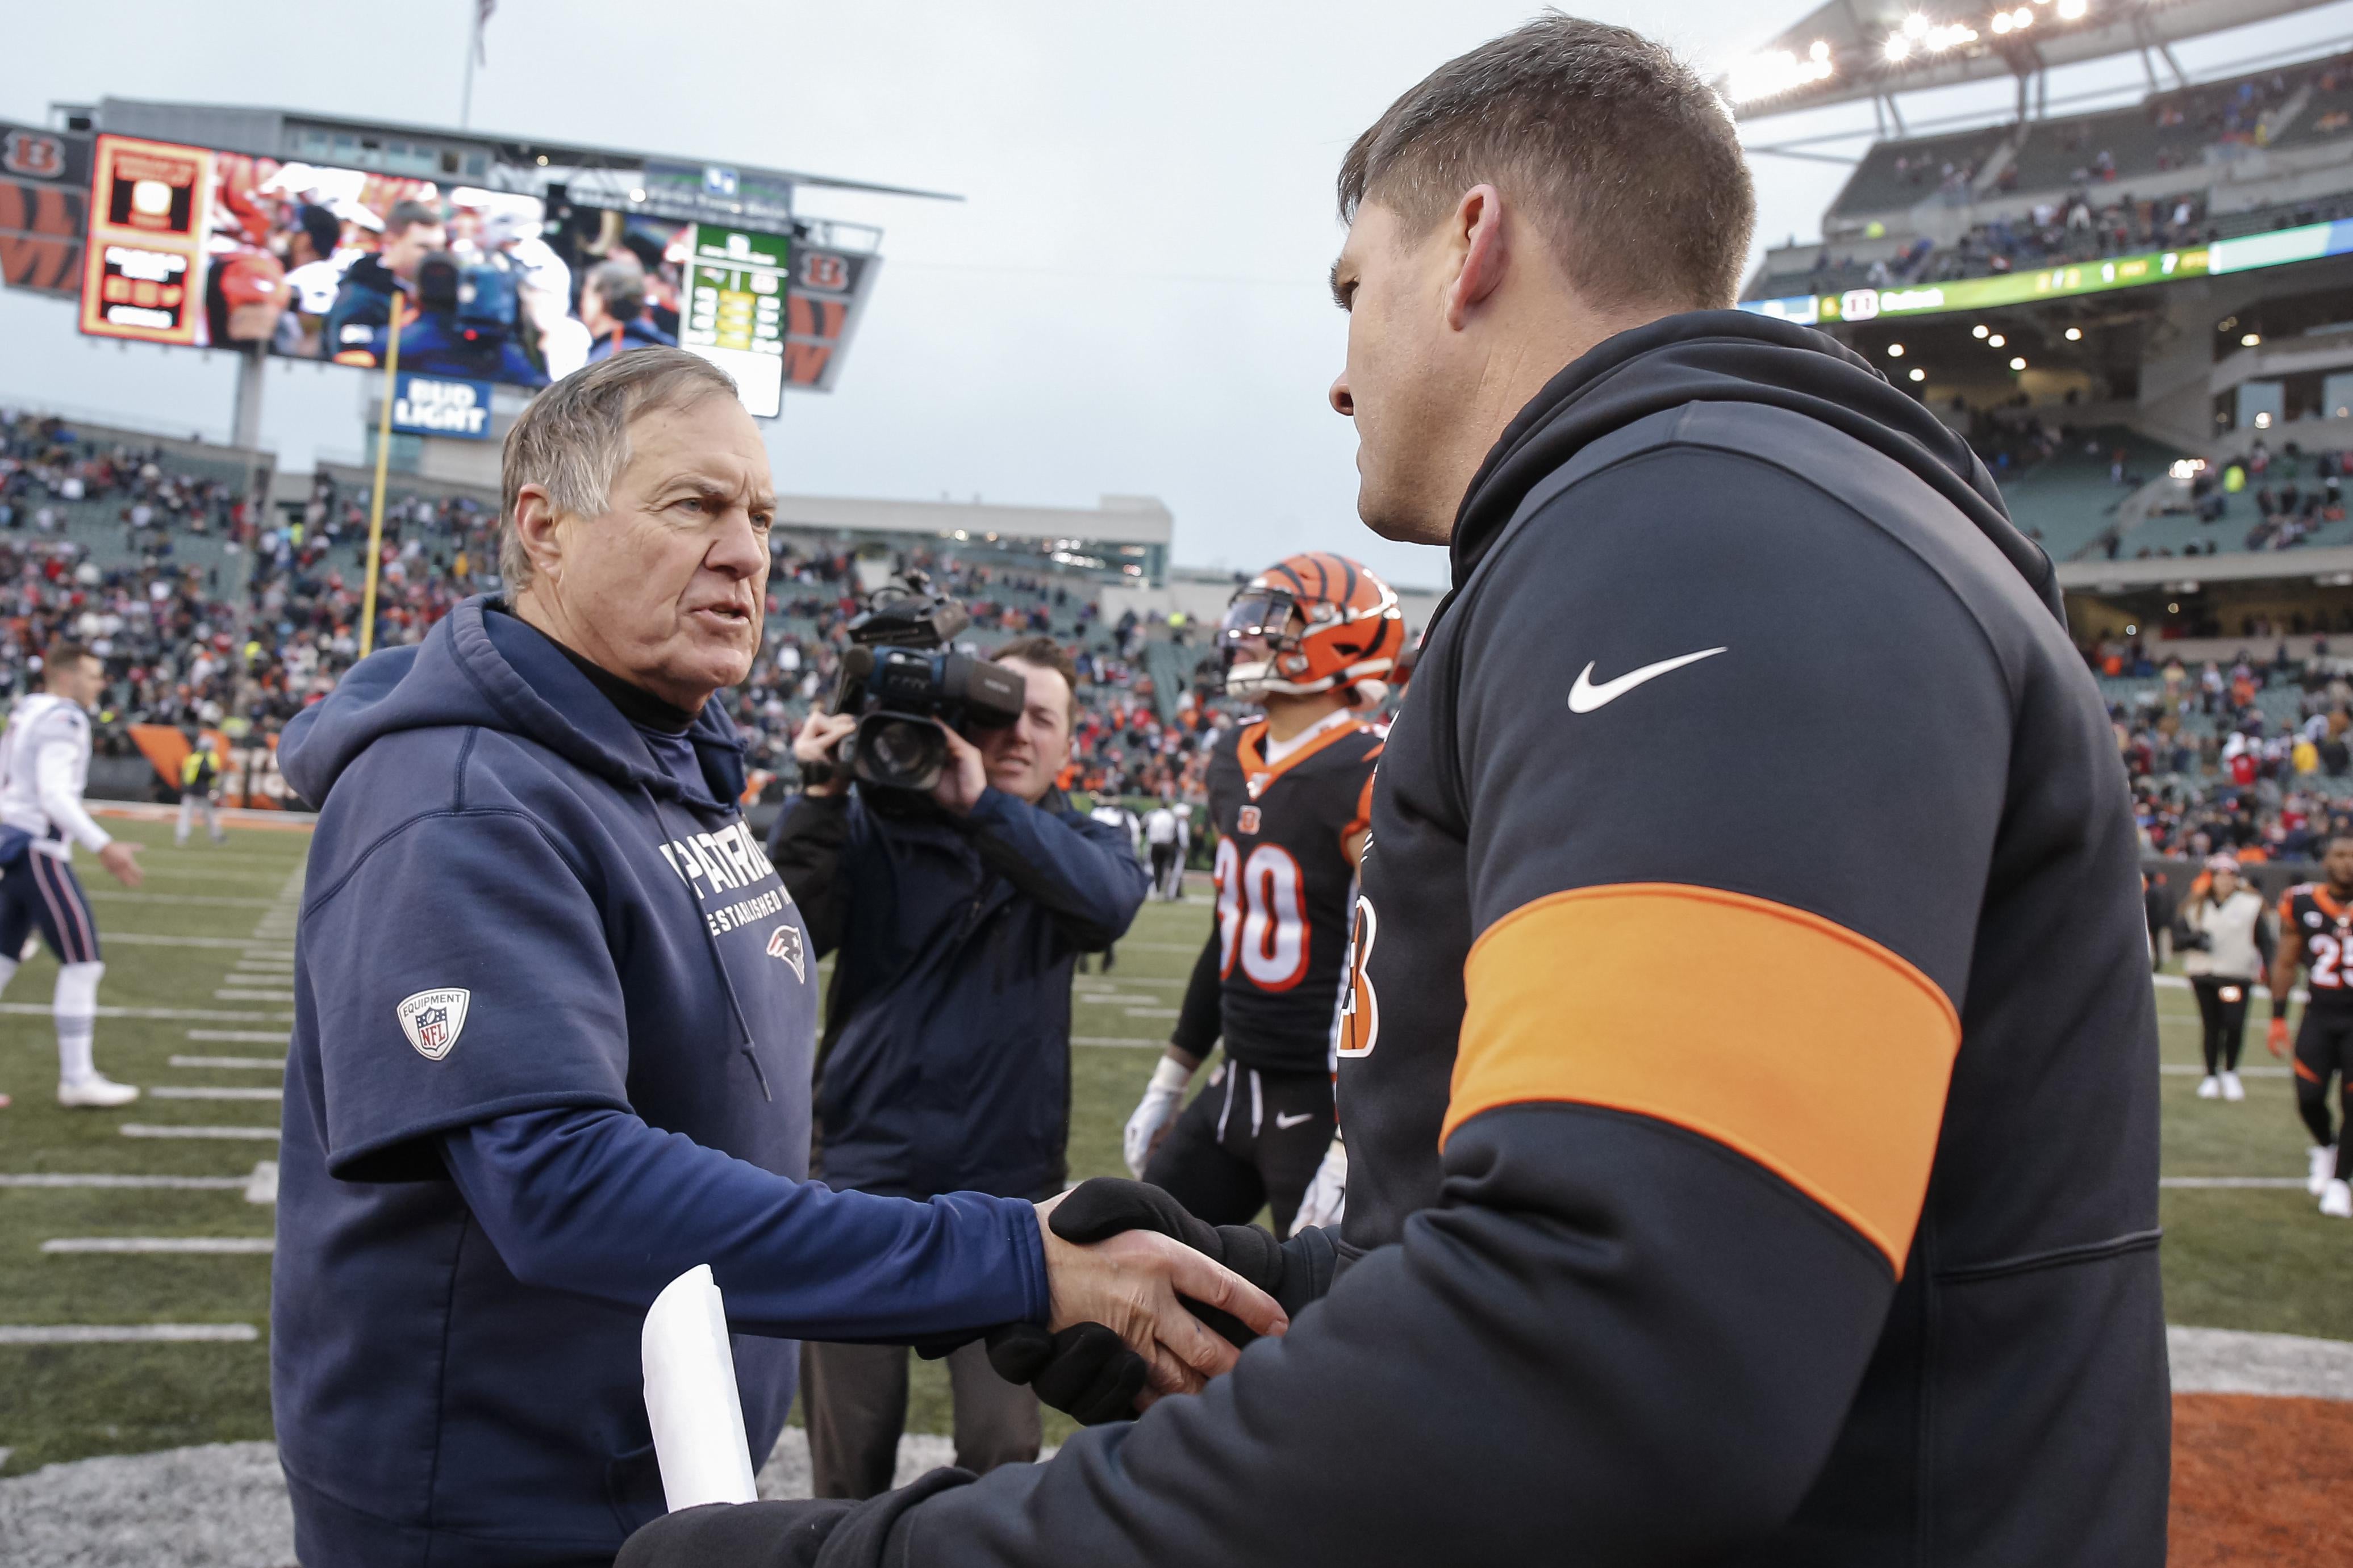 CINCINNATI, OH - DECEMBER 15: Head coach Bill Belichick of the New England Patriots and Head coach Zac Taylor of the Cincinnati Bengals shake hands following the game at Paul Brown Stadium on December 15, 2019 in Cincinnati, Ohio. (Photo by Michael Hickey/Getty Images)